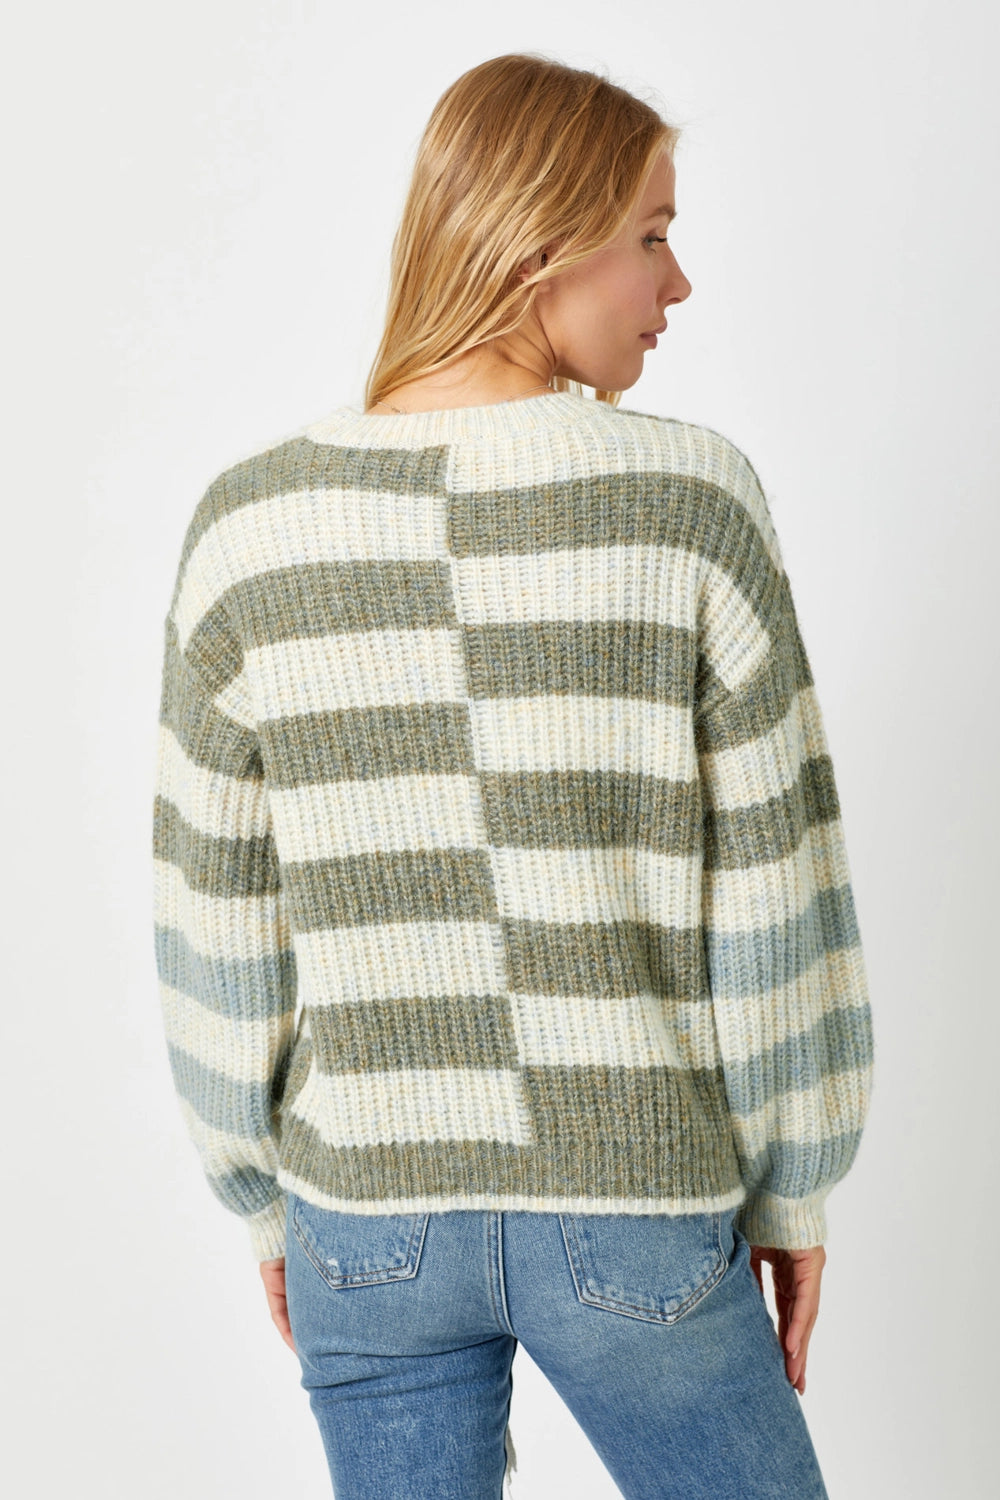 Changing Colors Sweater, Ivory/Olive